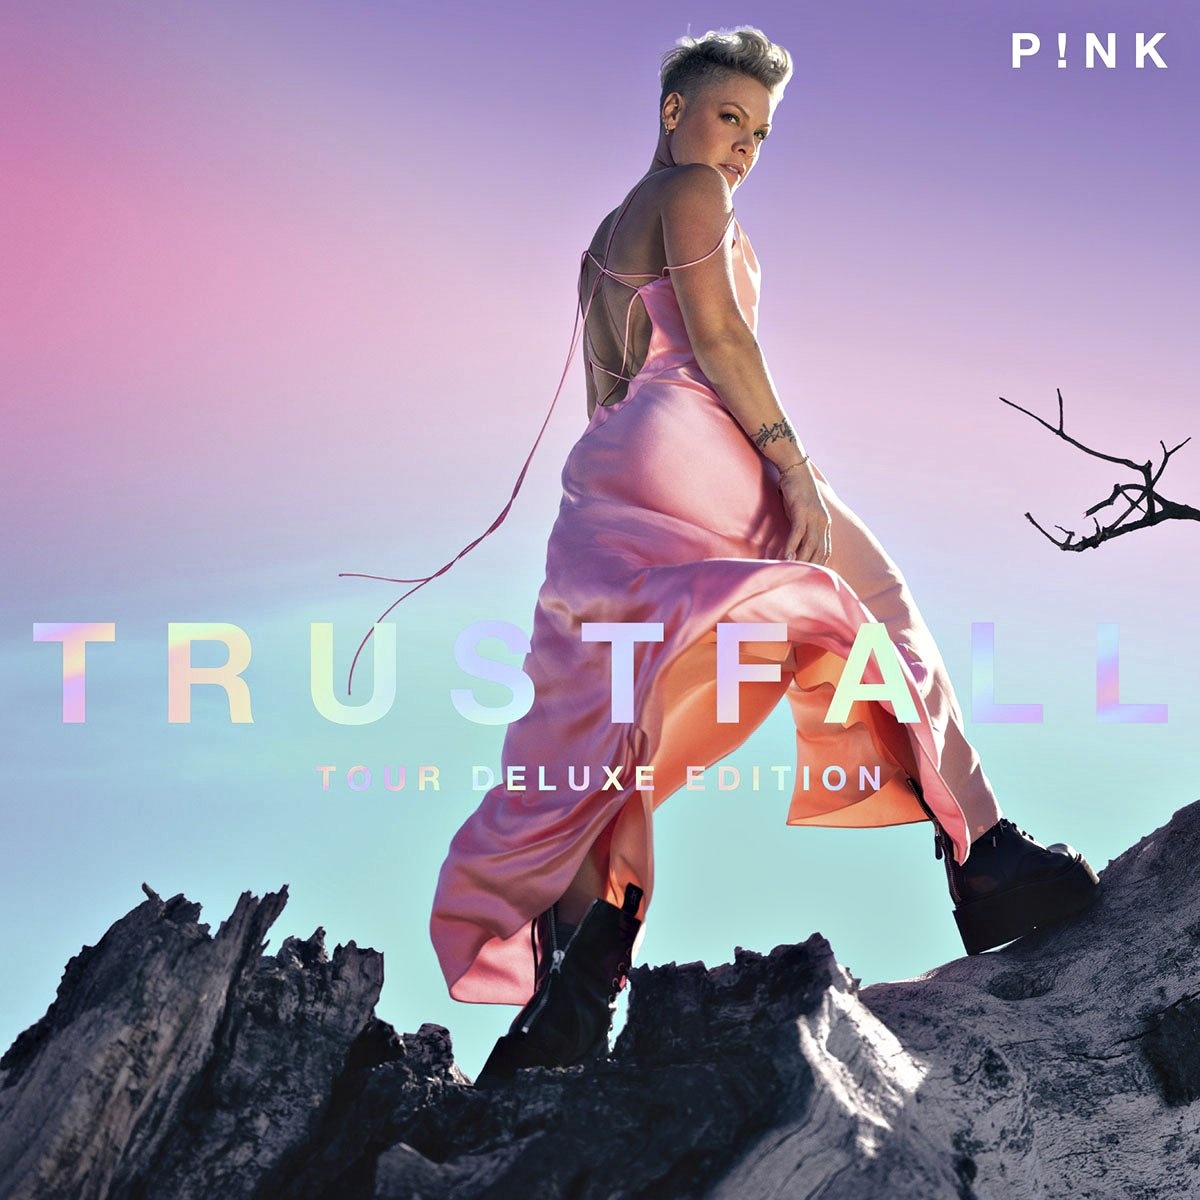 TRUSTFALL (Tour Deluxe Edition) (2 CDs) - Pink. (CD)